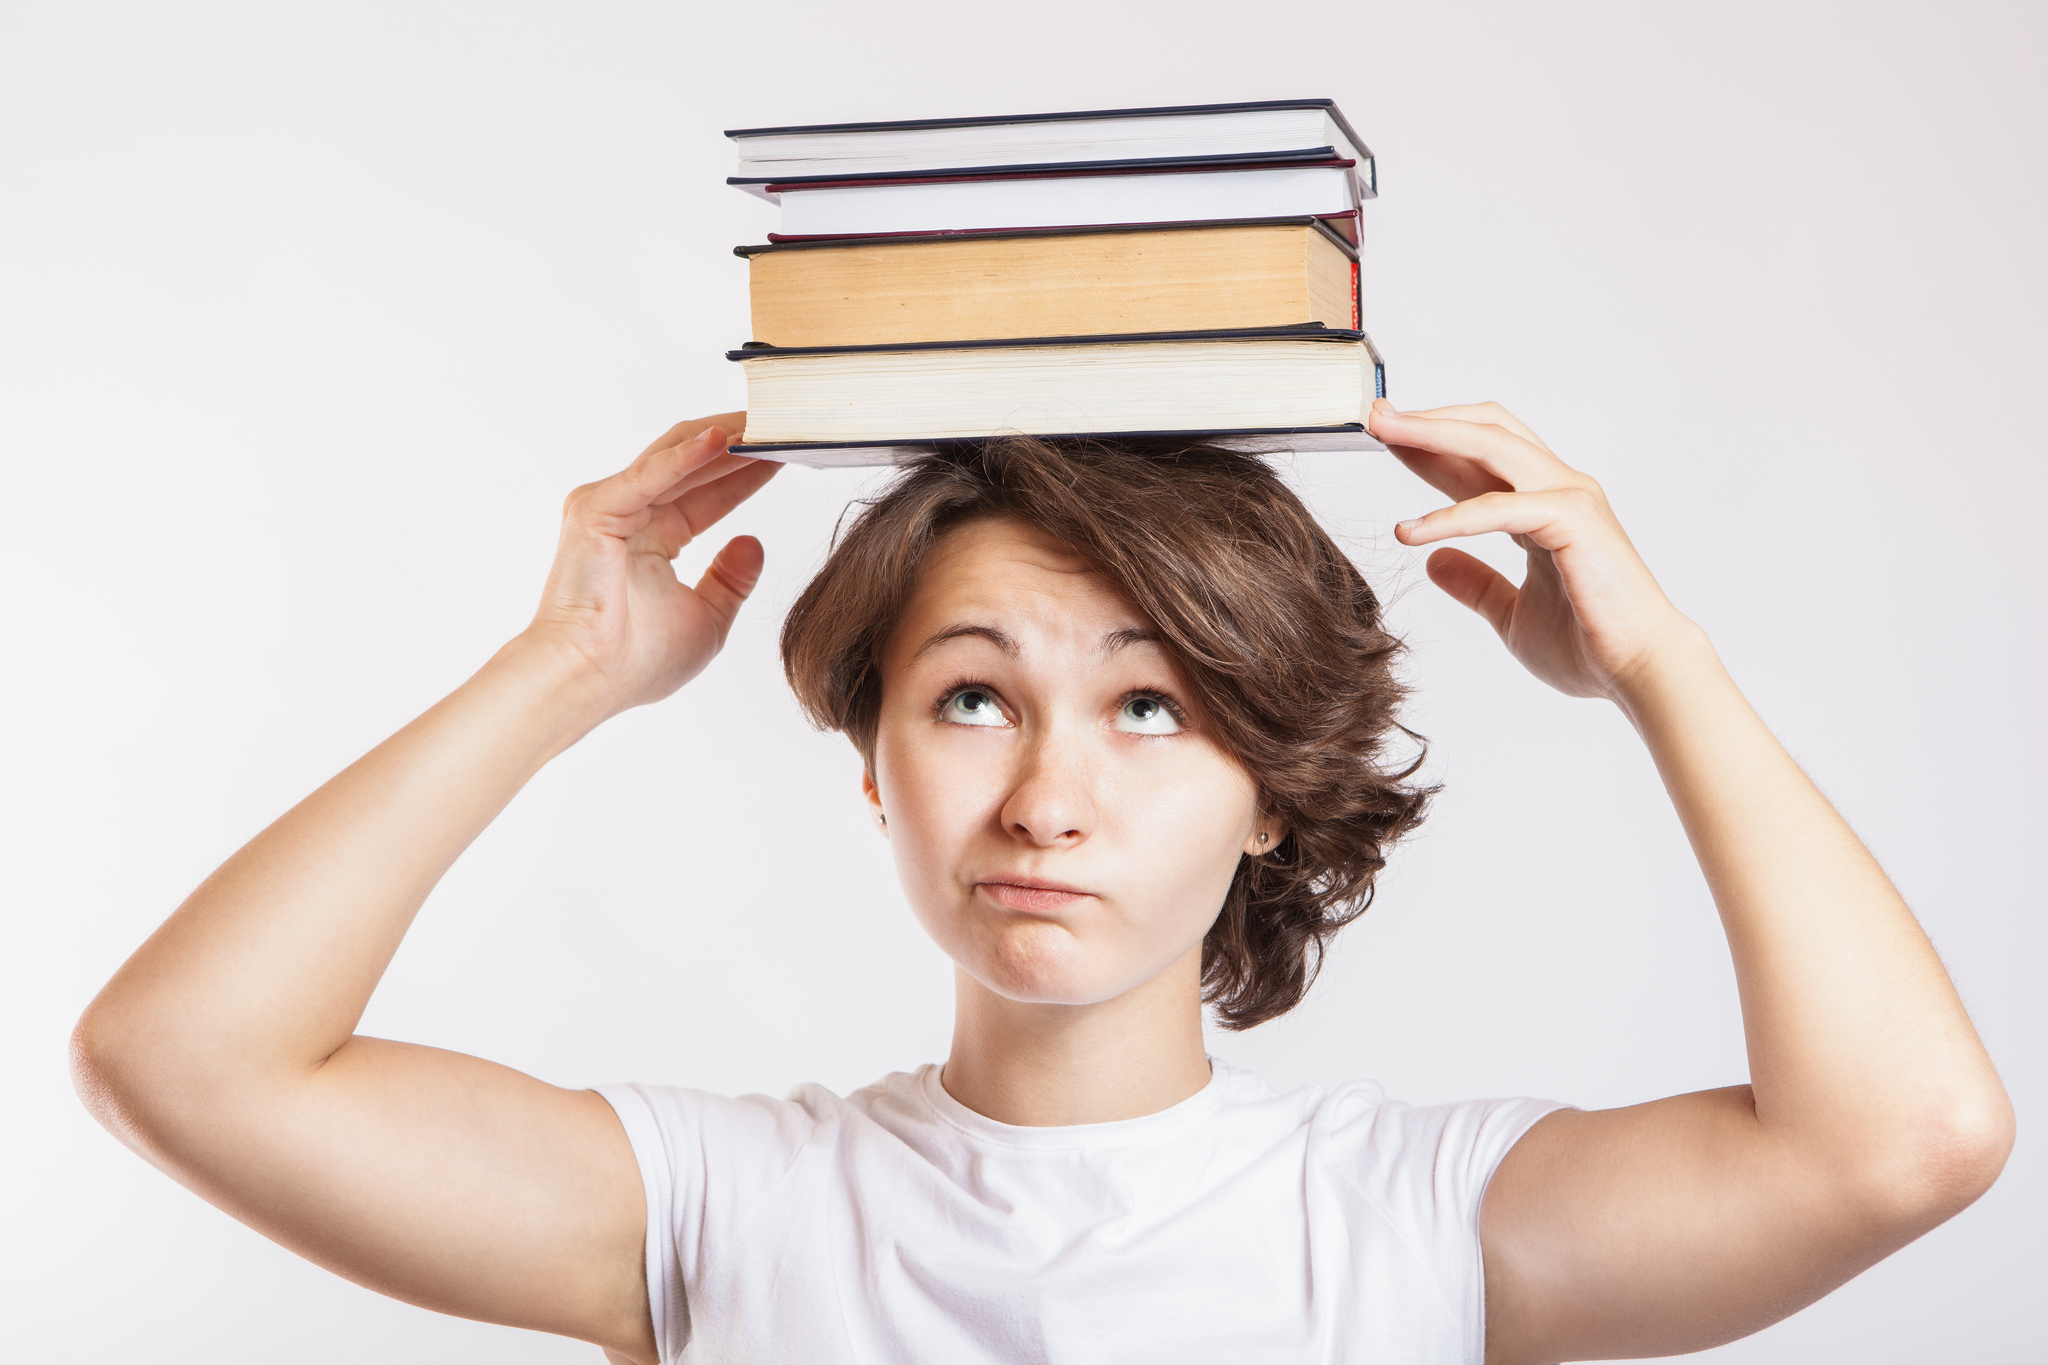 5 Important Facts No One Ever Told You About Grad School